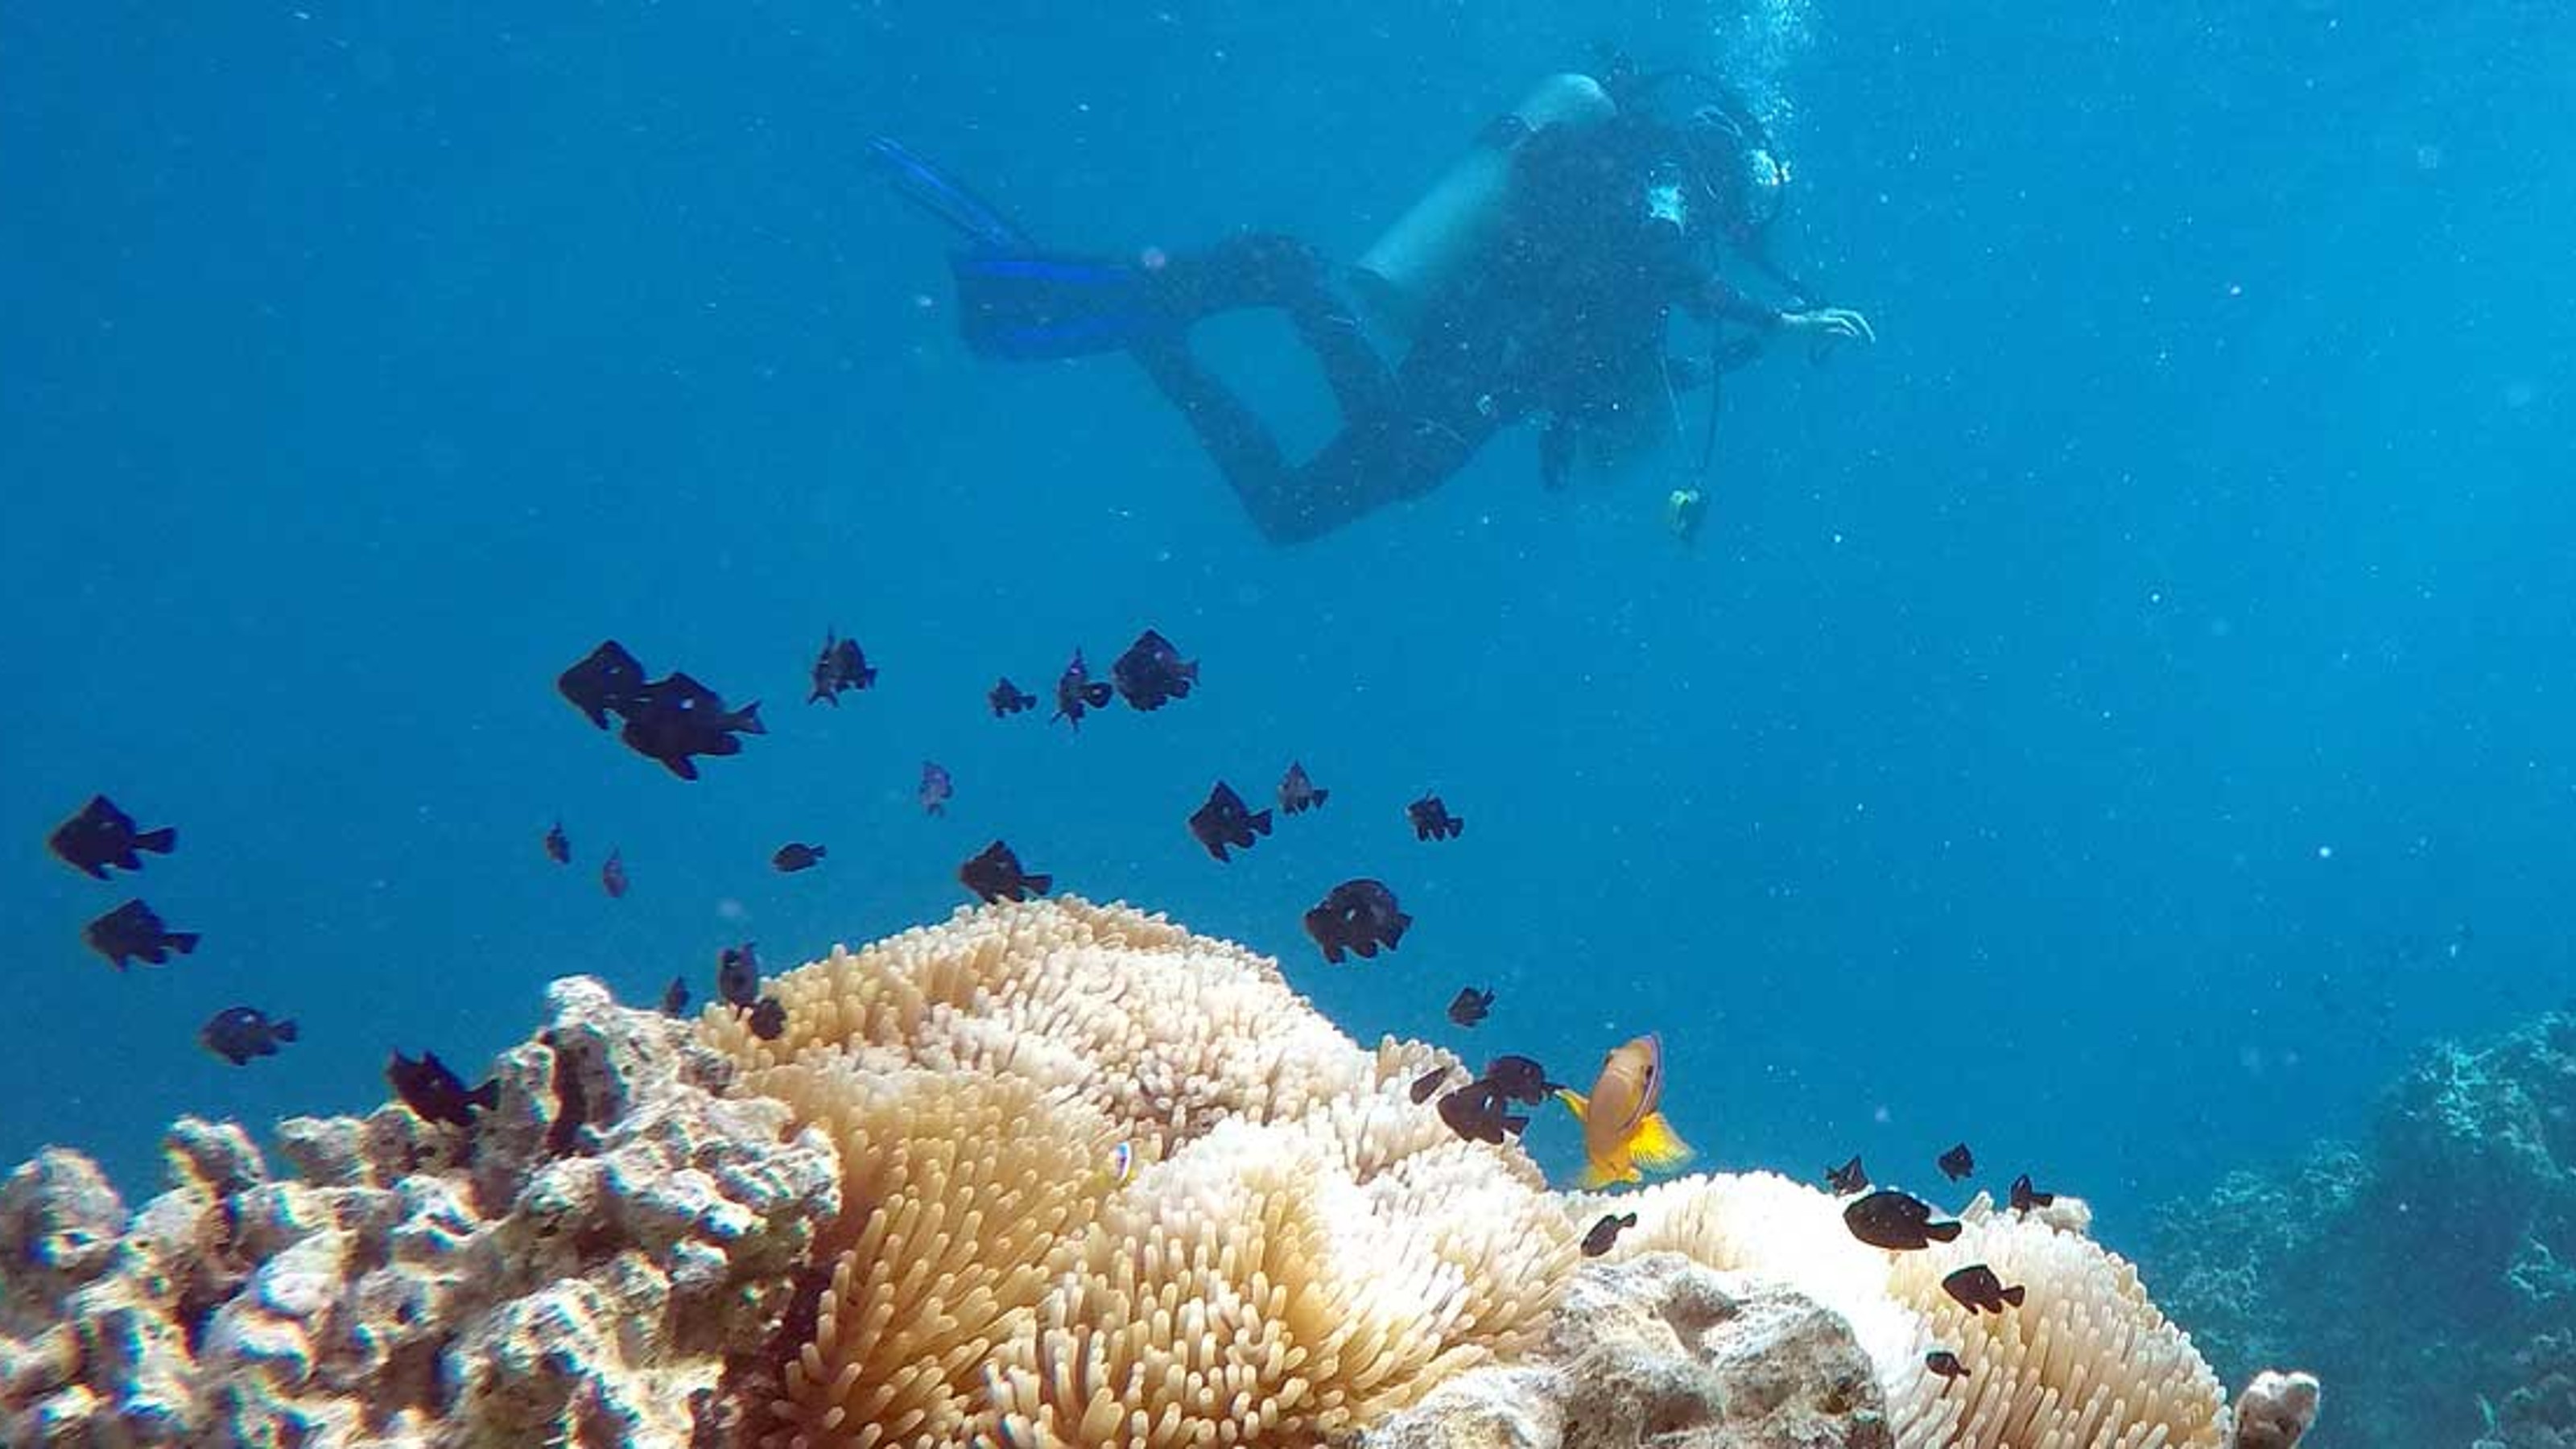 Underwater shot of scuba diver, coral, and fish